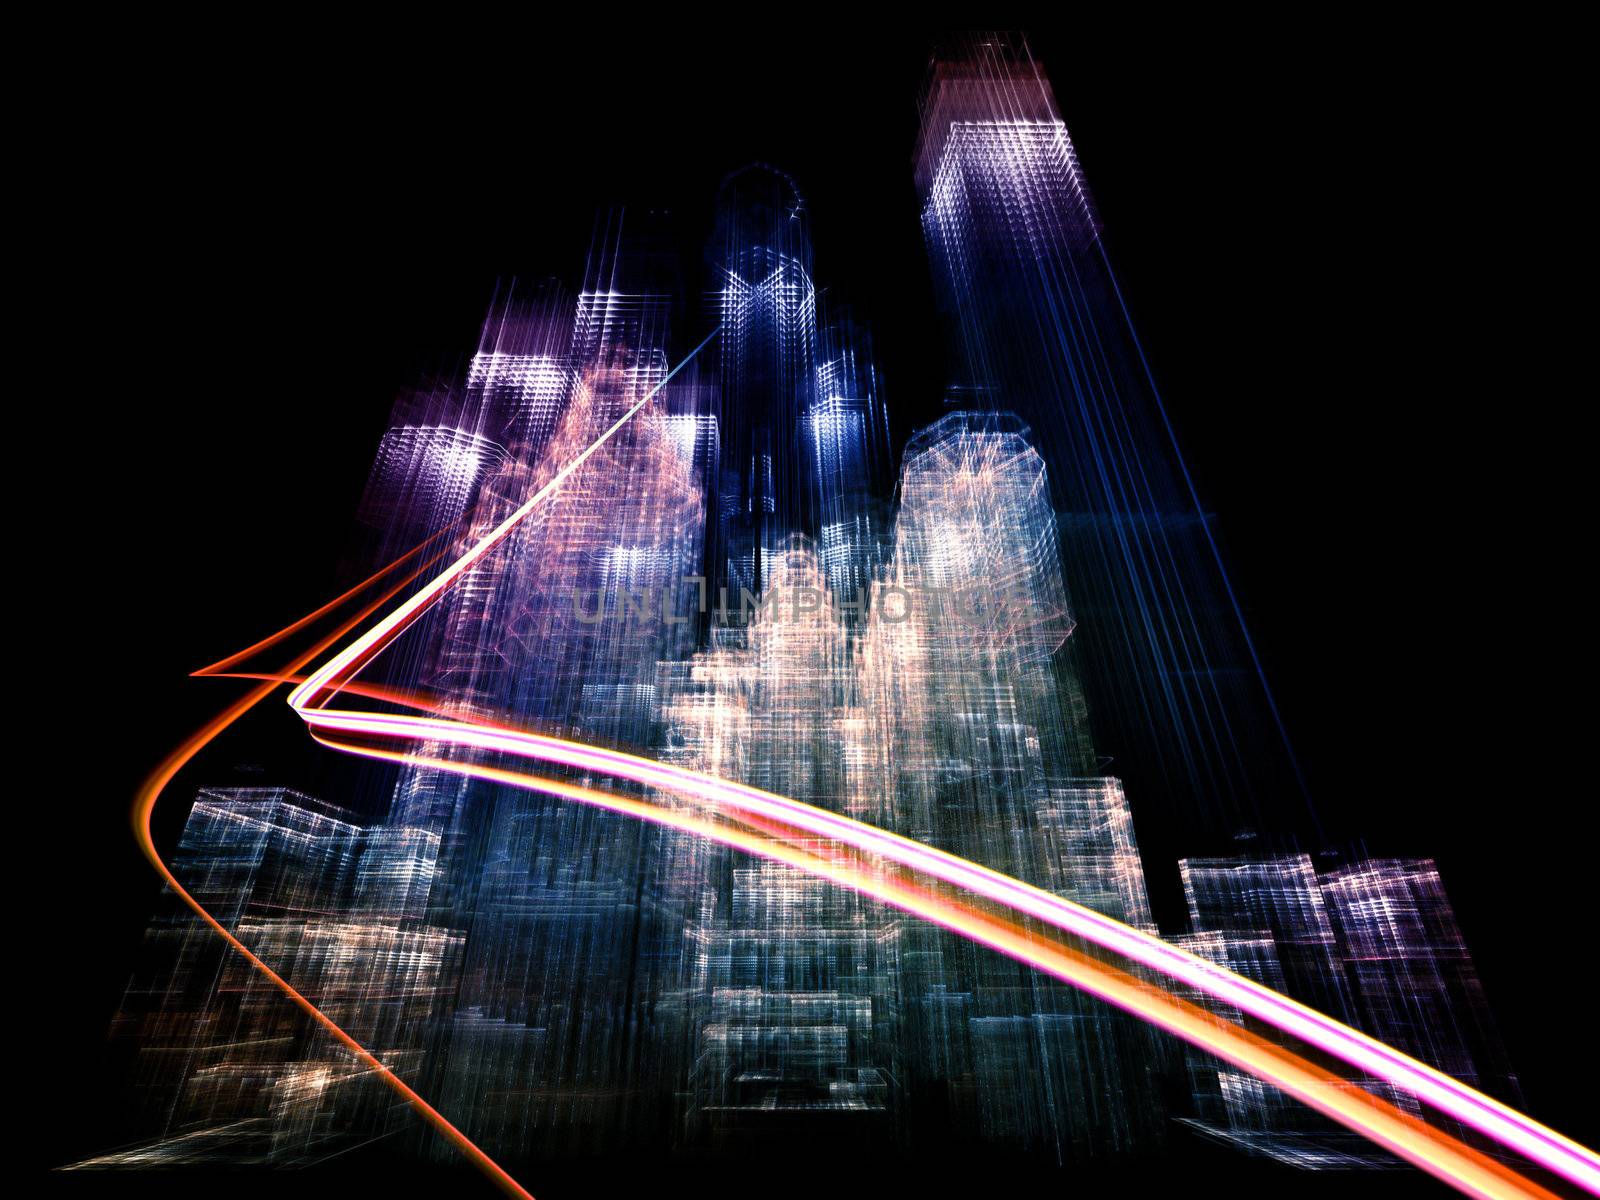 Interplay of abstract building structures and light trails on the subject of dynamism in modern technologies and business